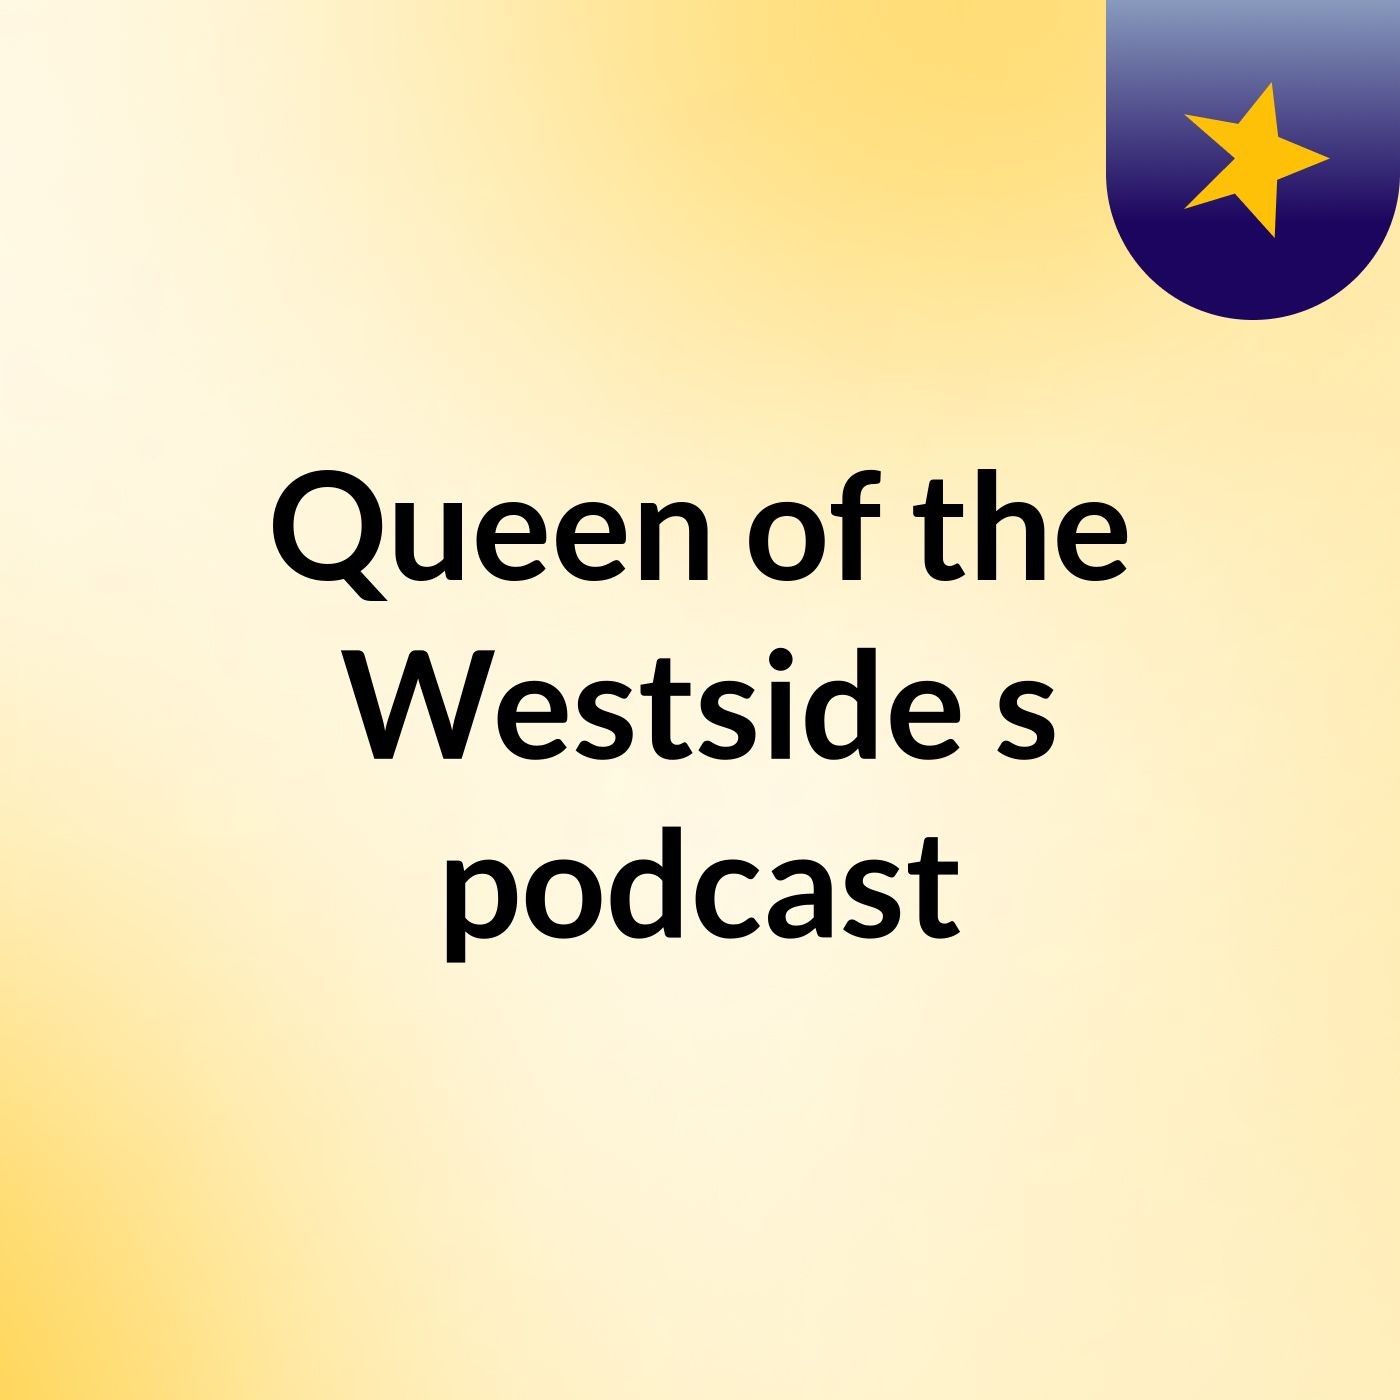 Episode 2 - Queen of the Westside's podcast